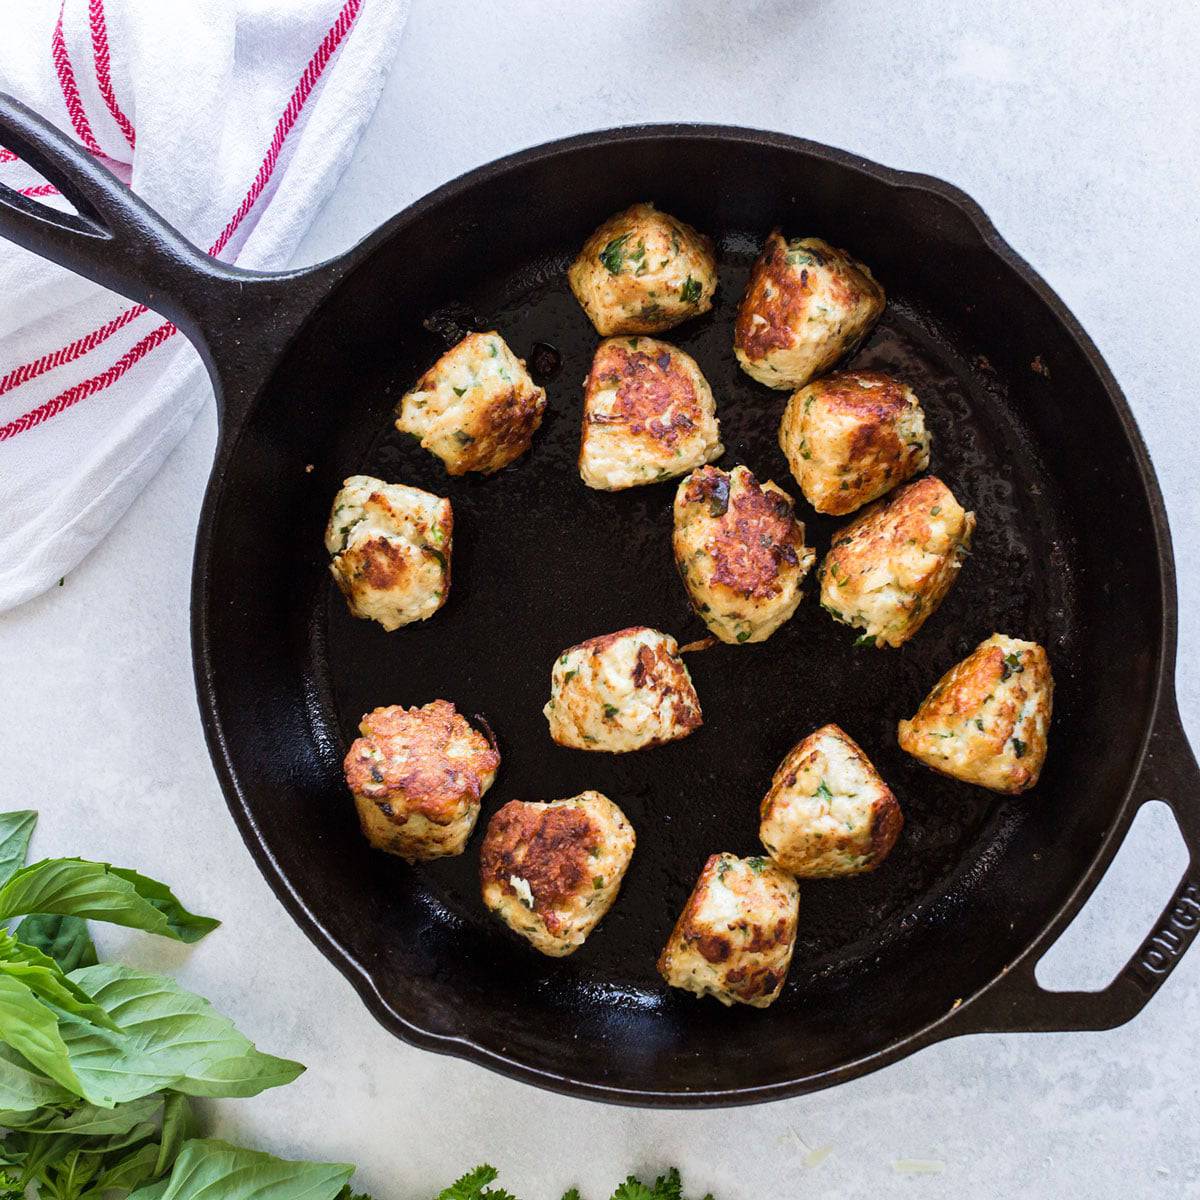 Skillet with browned chicken meatballs